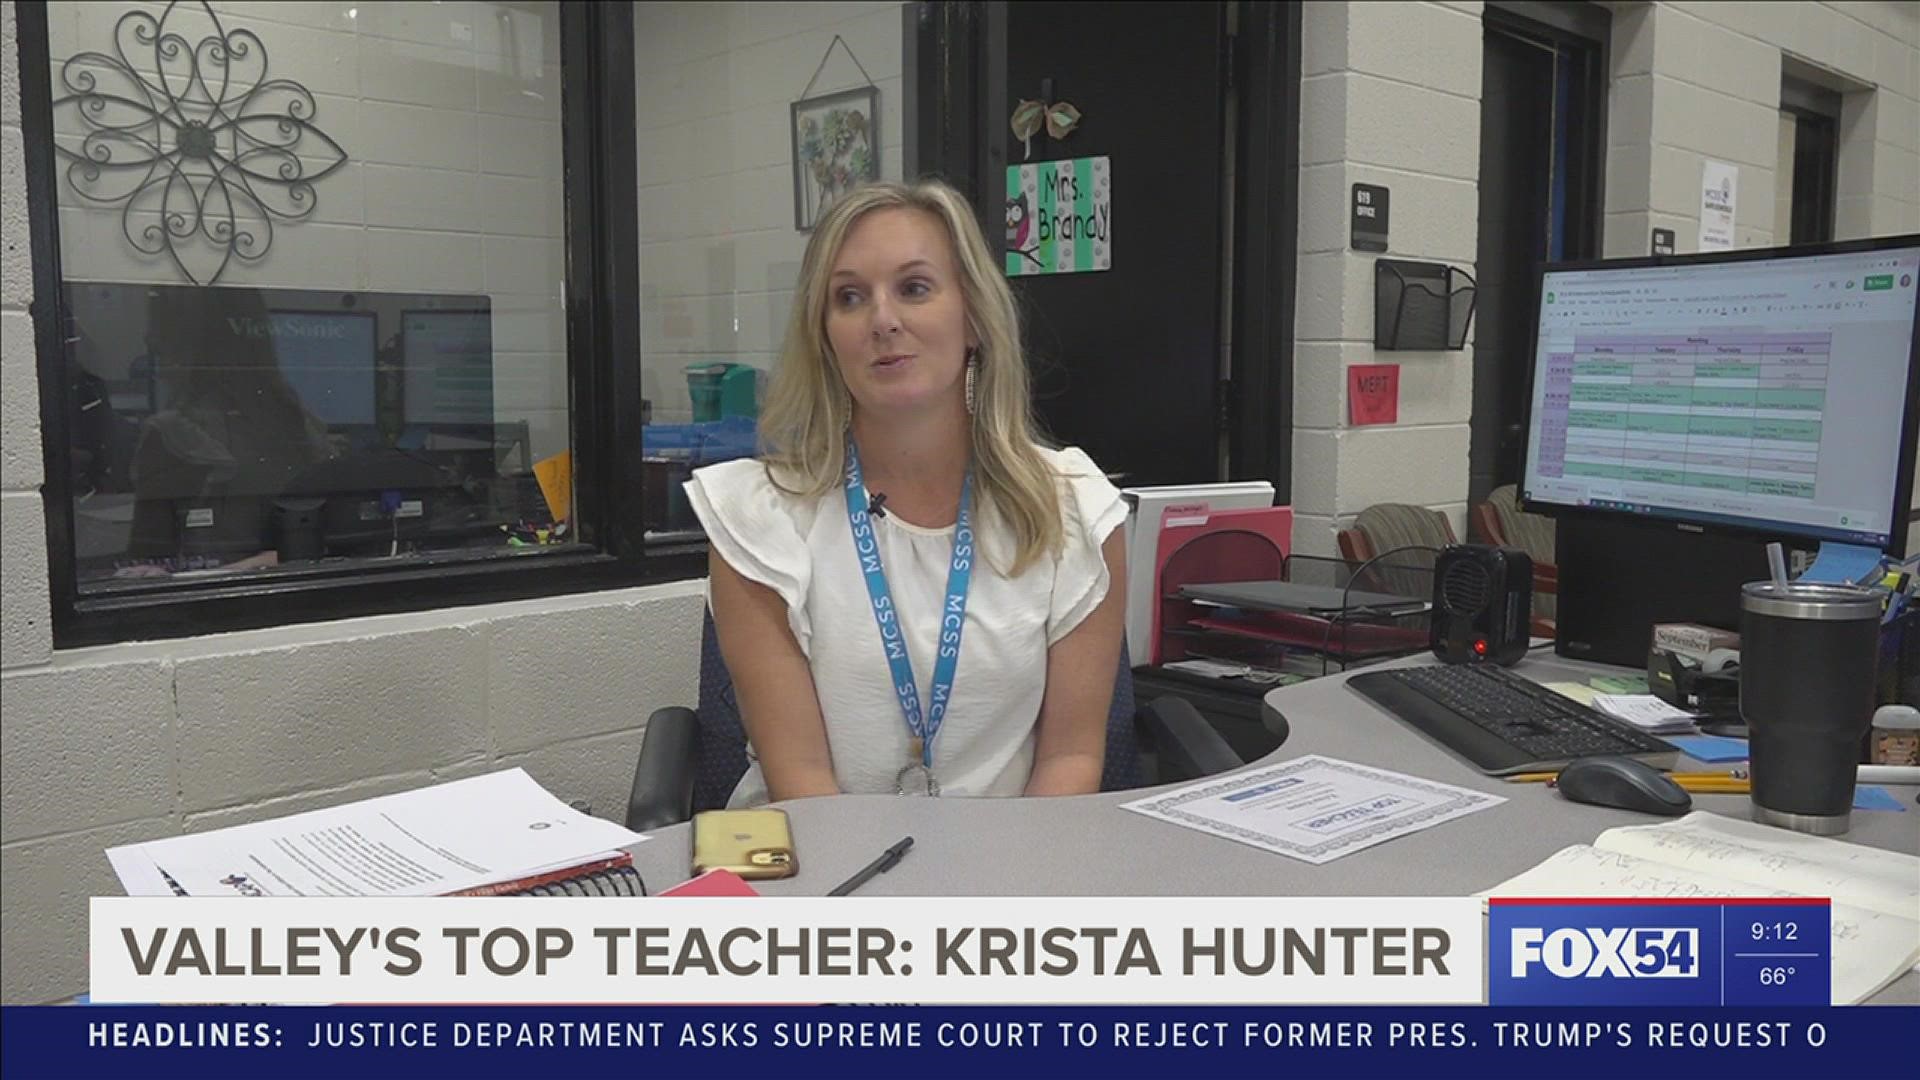 Krista Hunter has been teaching for 23 years.